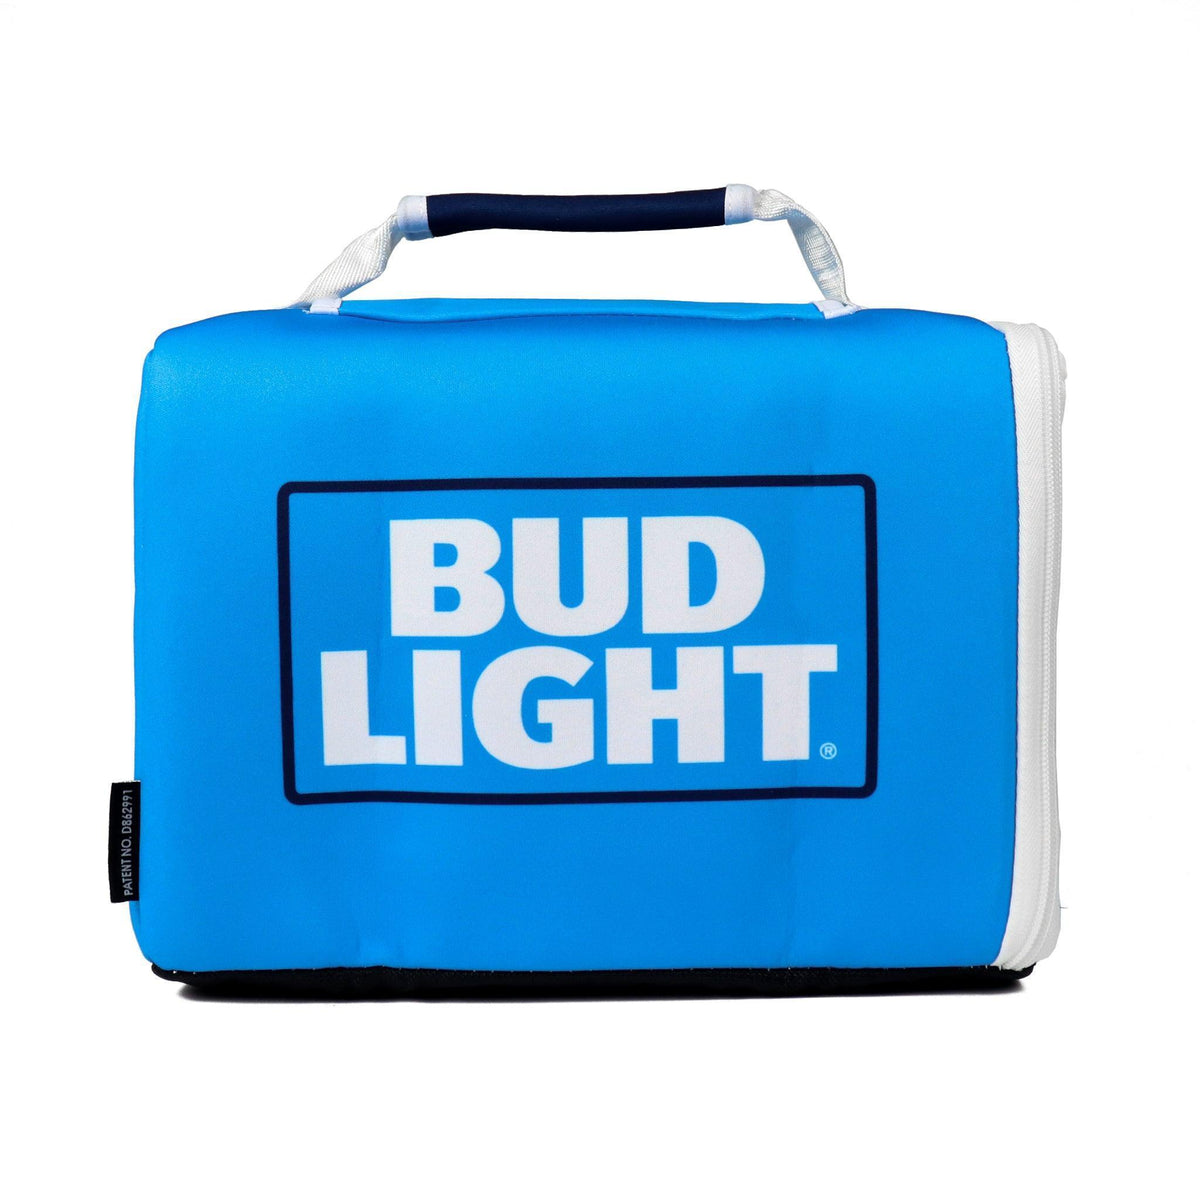 https://www.shopbeergears.shop/wp-content/uploads/1692/92/bud-light-blue-12-or-24-pk-kanga-kase-mate-bud-light-the-more-you-purchase-the-larger-discount-you-get_1.jpg